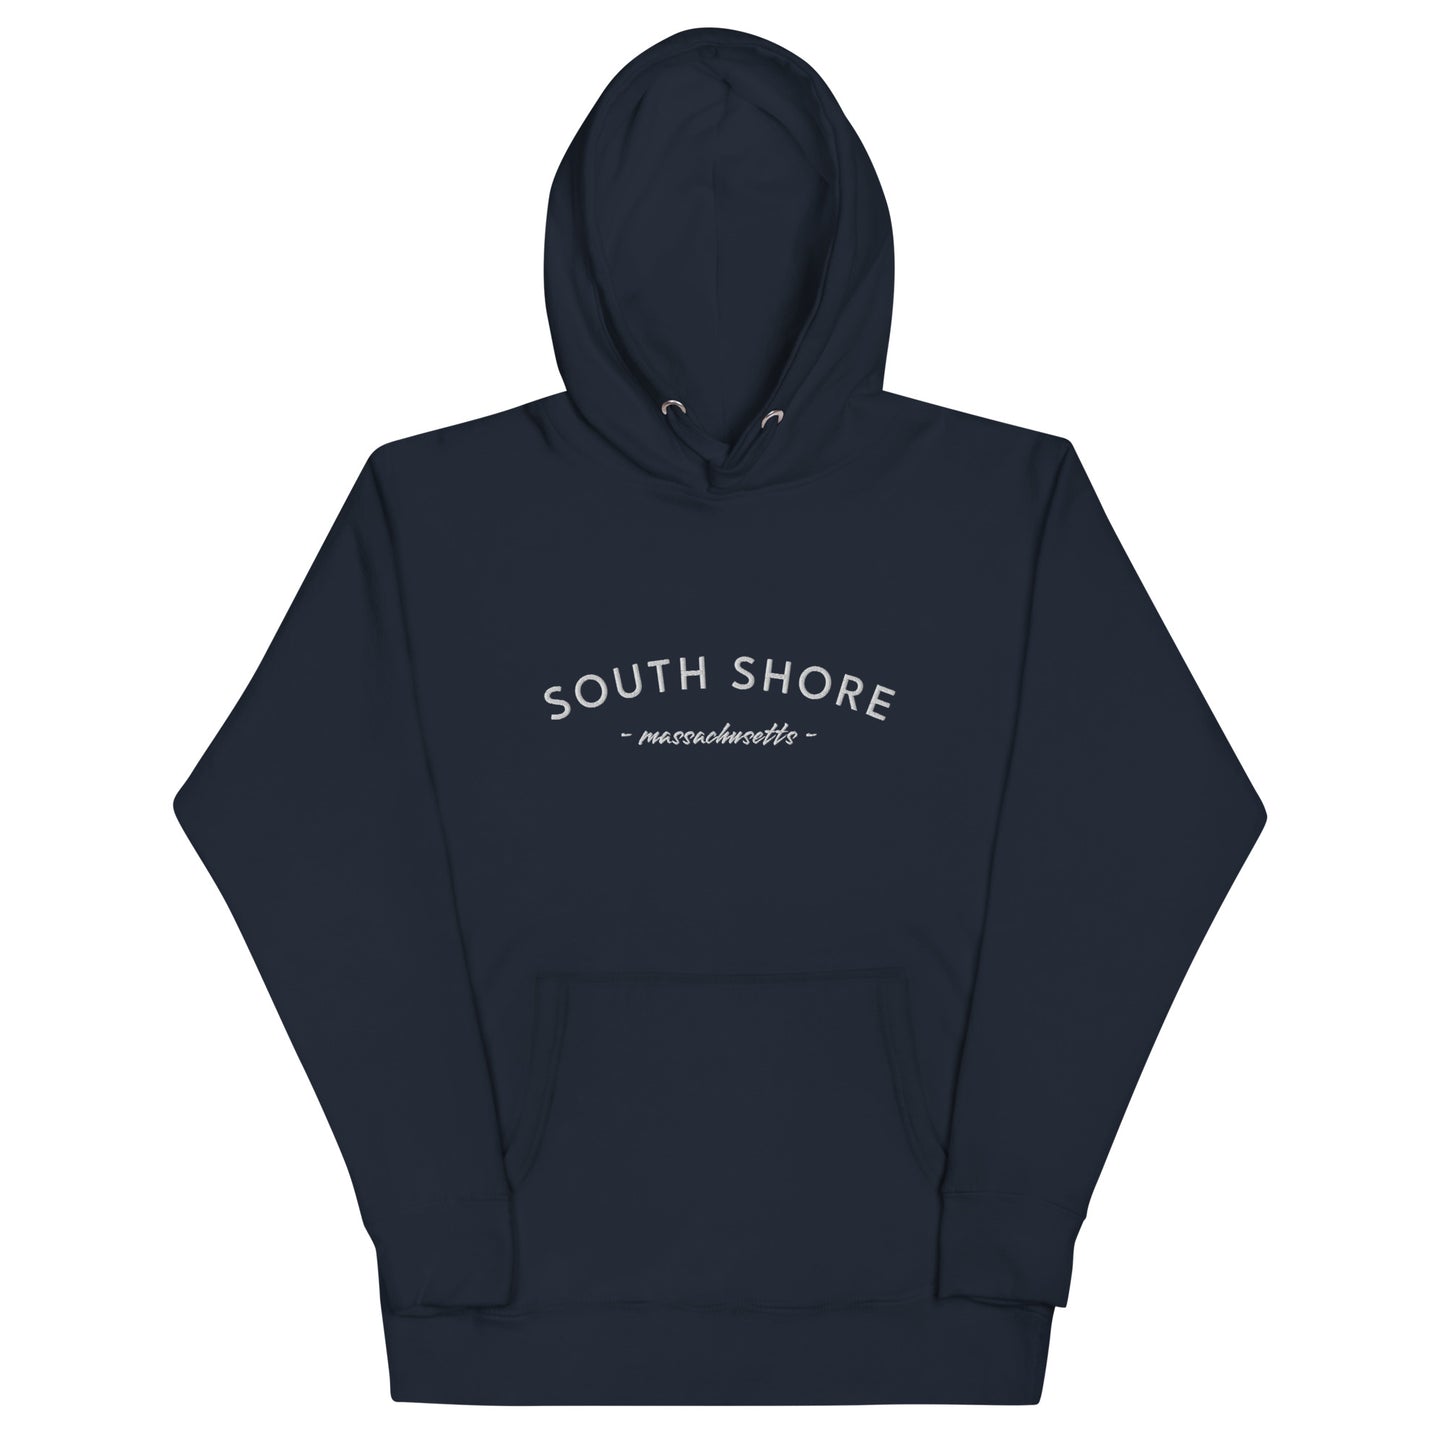 navy hoodie that says "south shore massachusetts" with white lettering